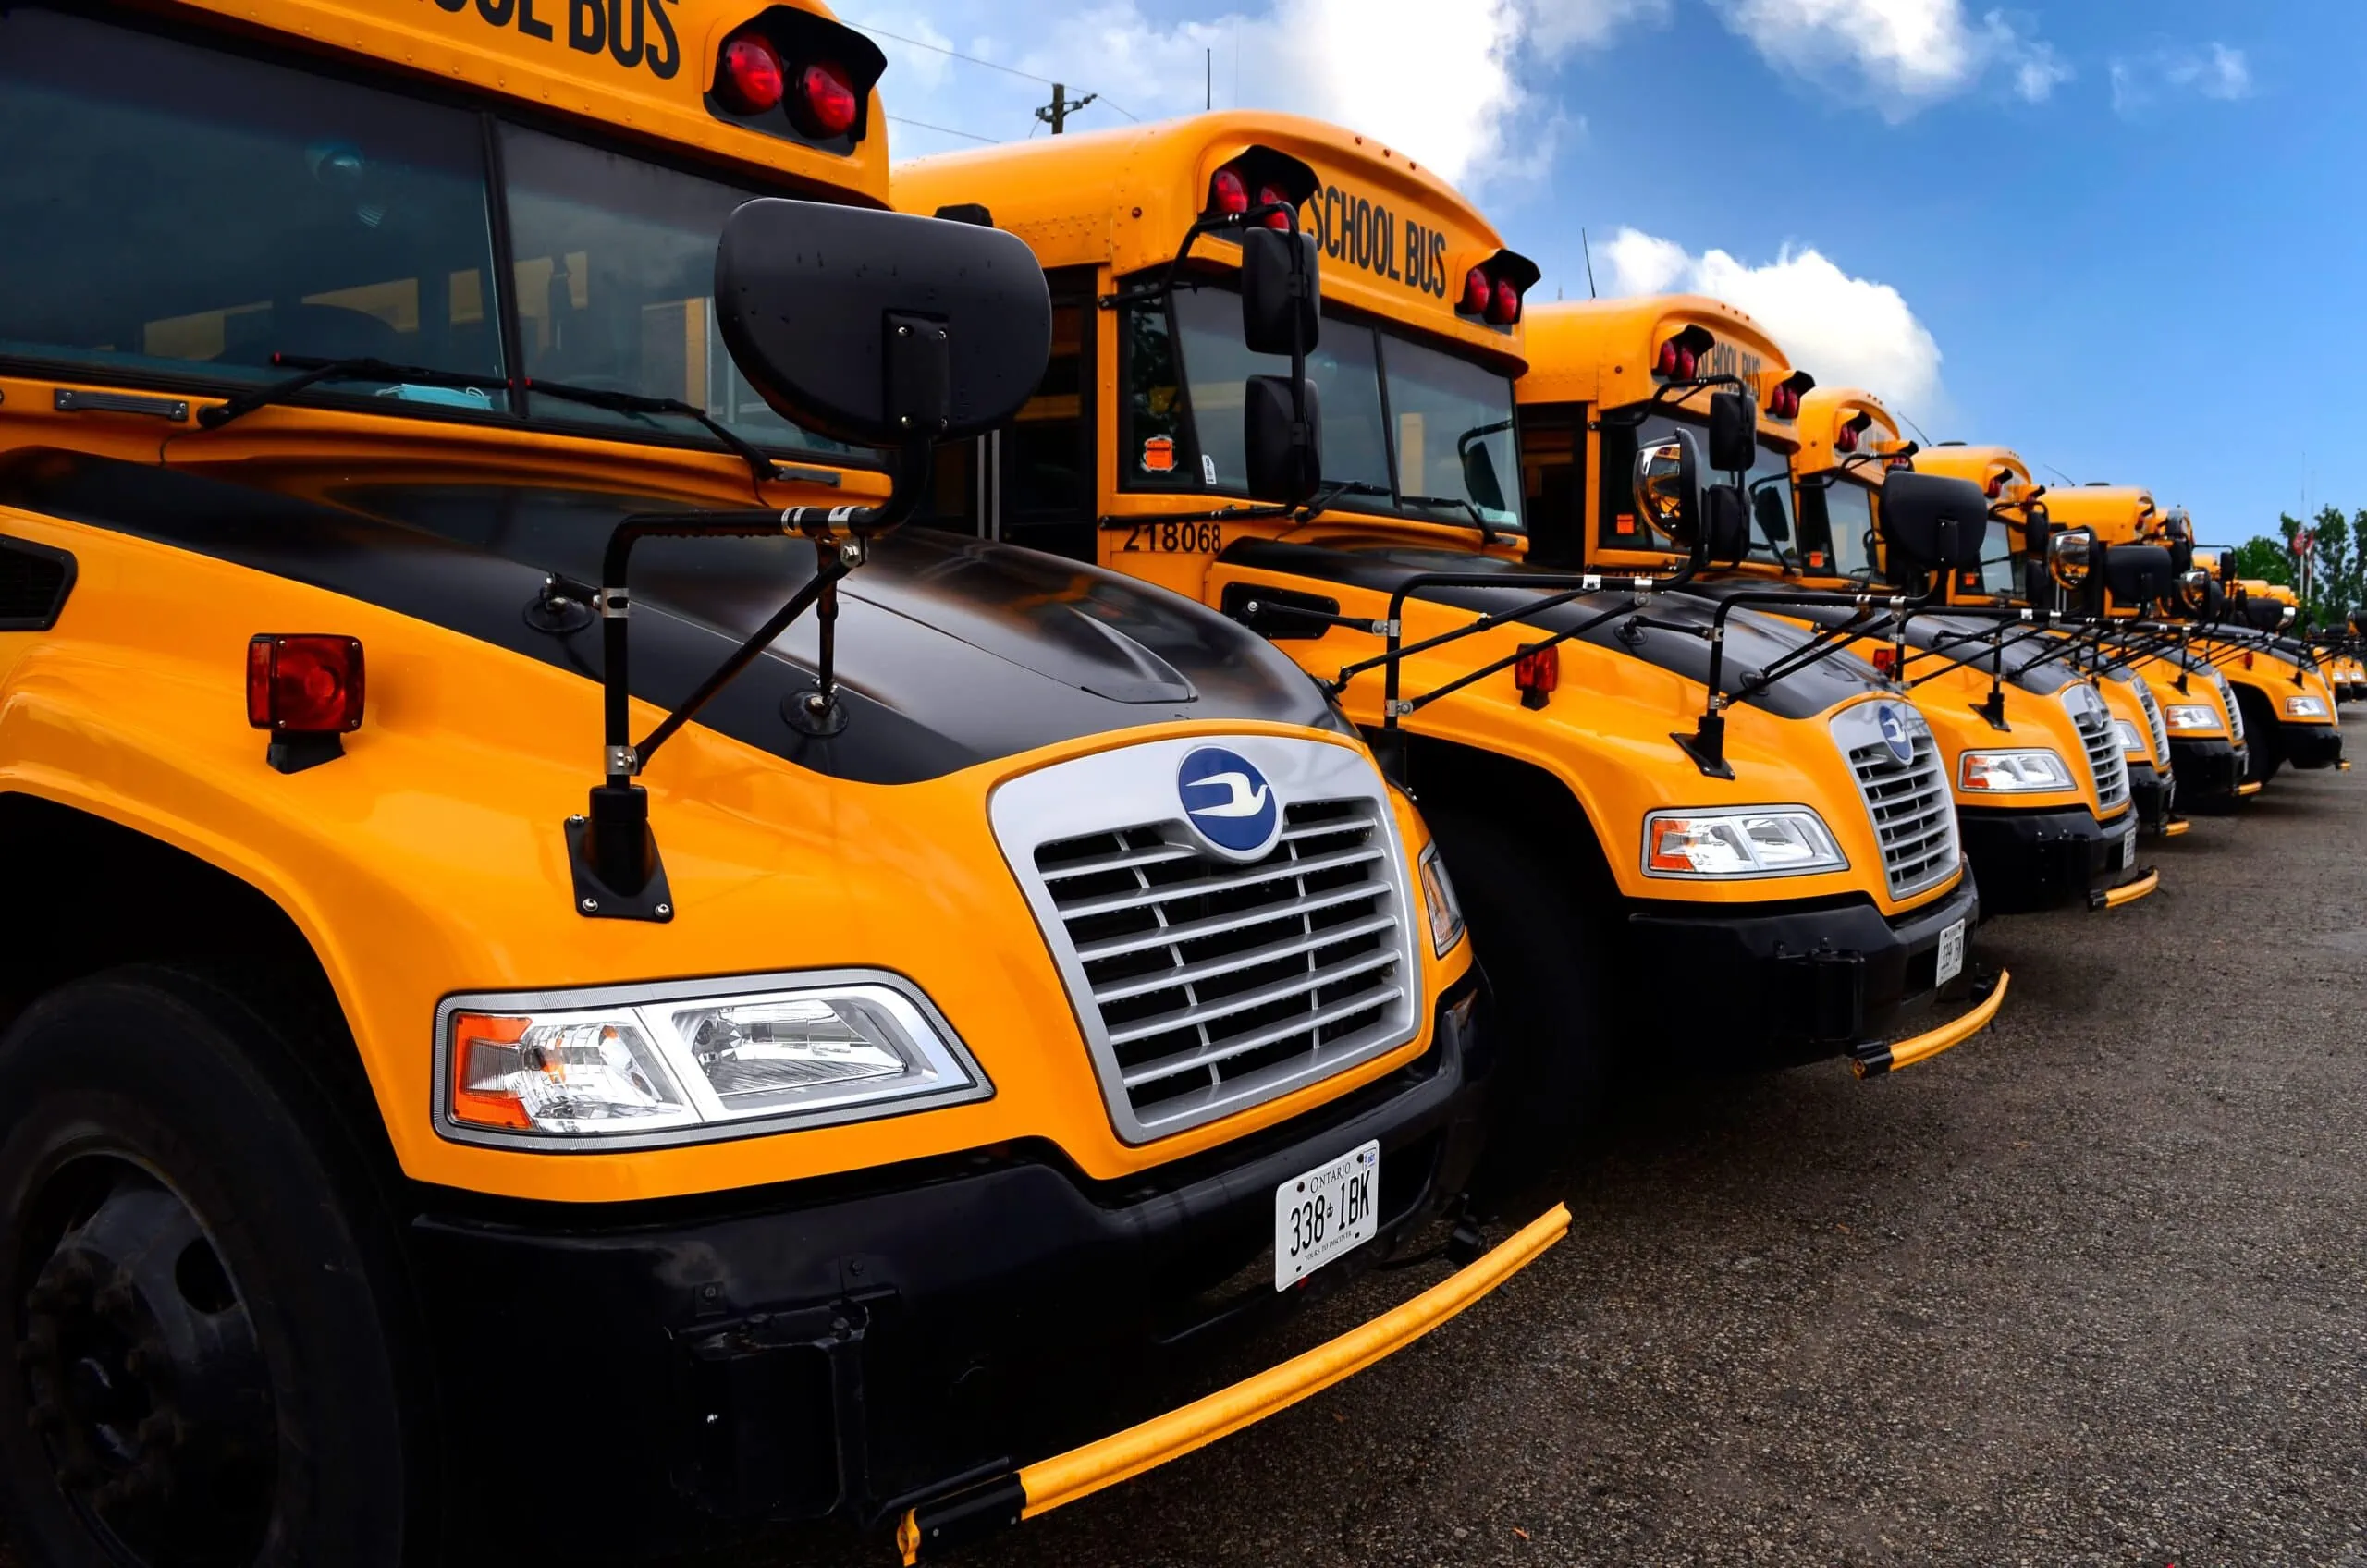 Row of buses in parking lot protected by school bus cameras